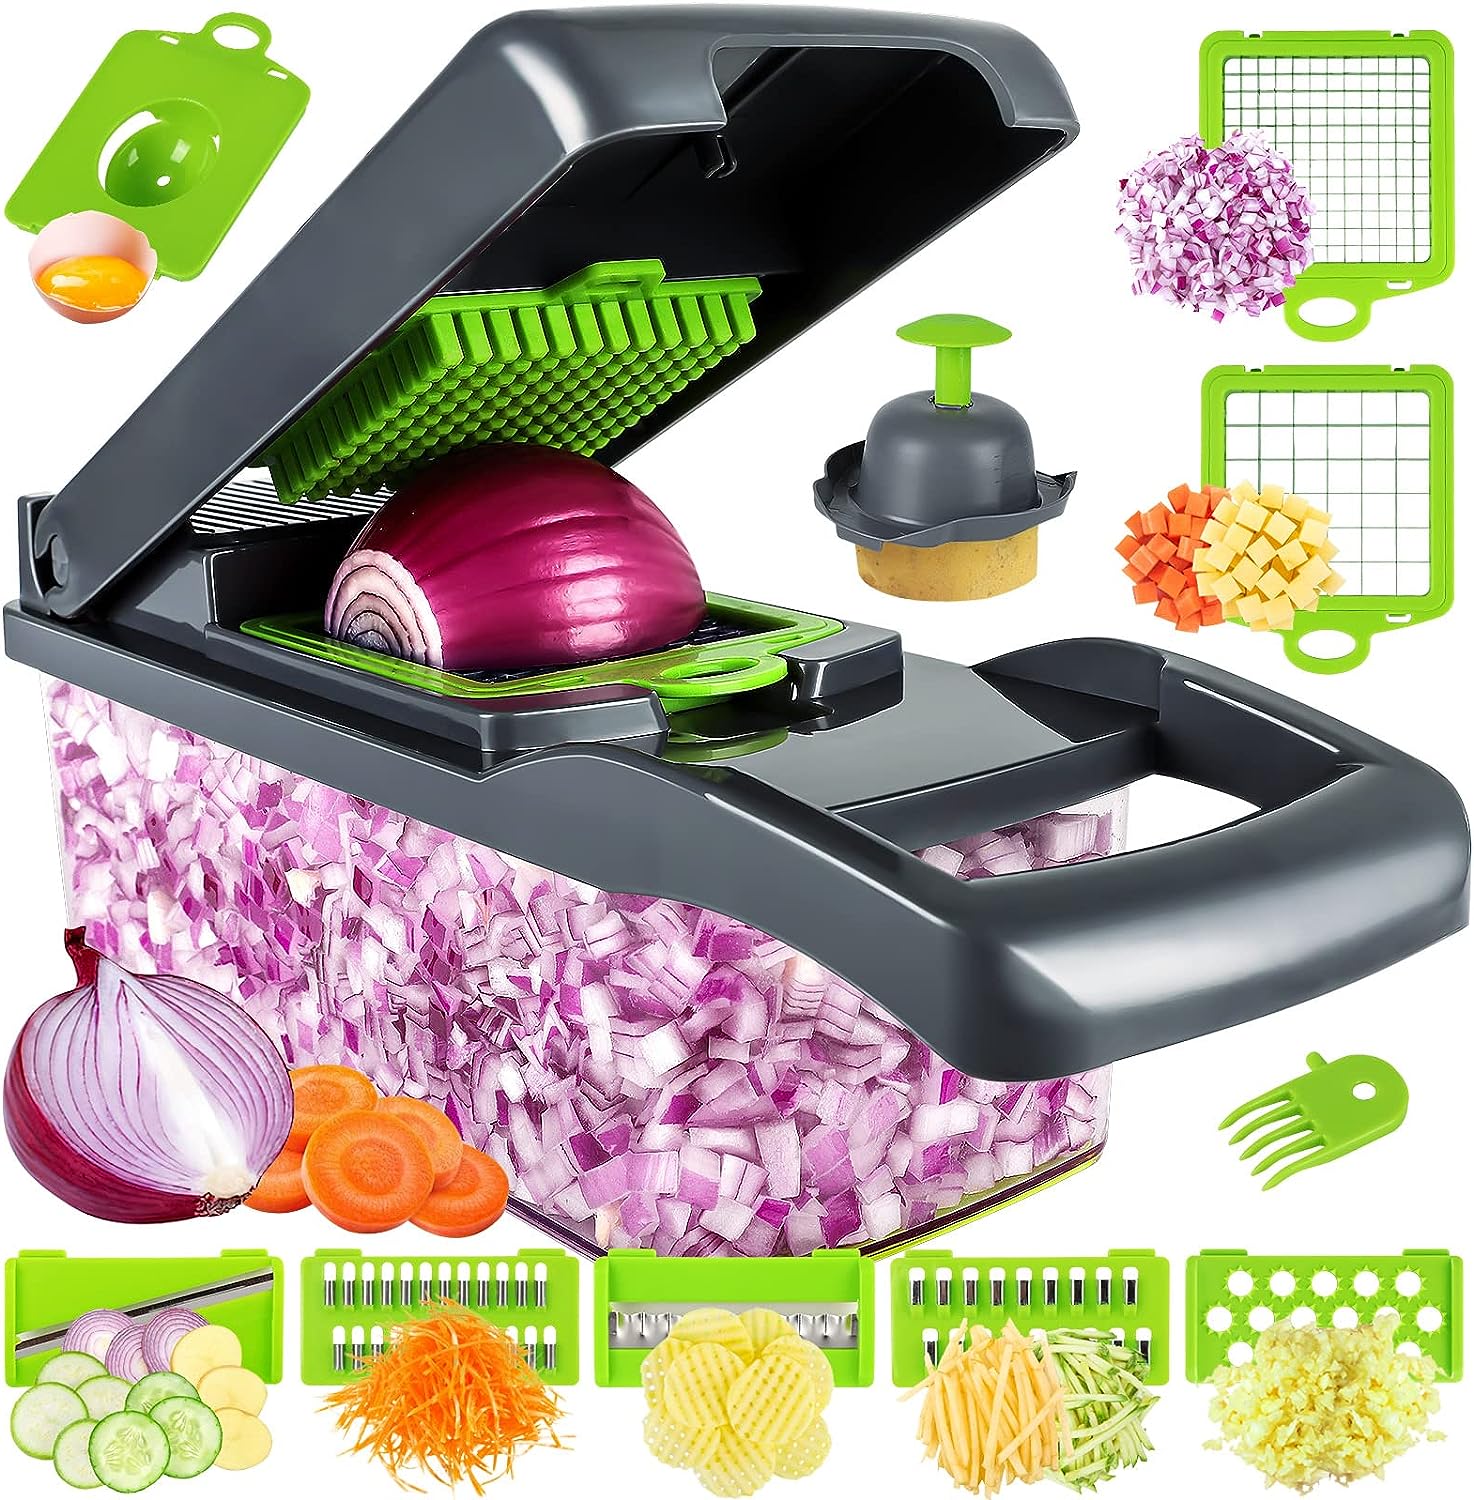 Wholesale prices with free shipping all over United States Vegetable Chopper, Pro Onion Chopper, Multifunctional 13 in 1 Food Chopper, Kitchen Vegetable Slicer Dicer Cutter,Veggie Chopper With 8 Blades,Carrot and Garlic Chopper With Container - Steven Deals